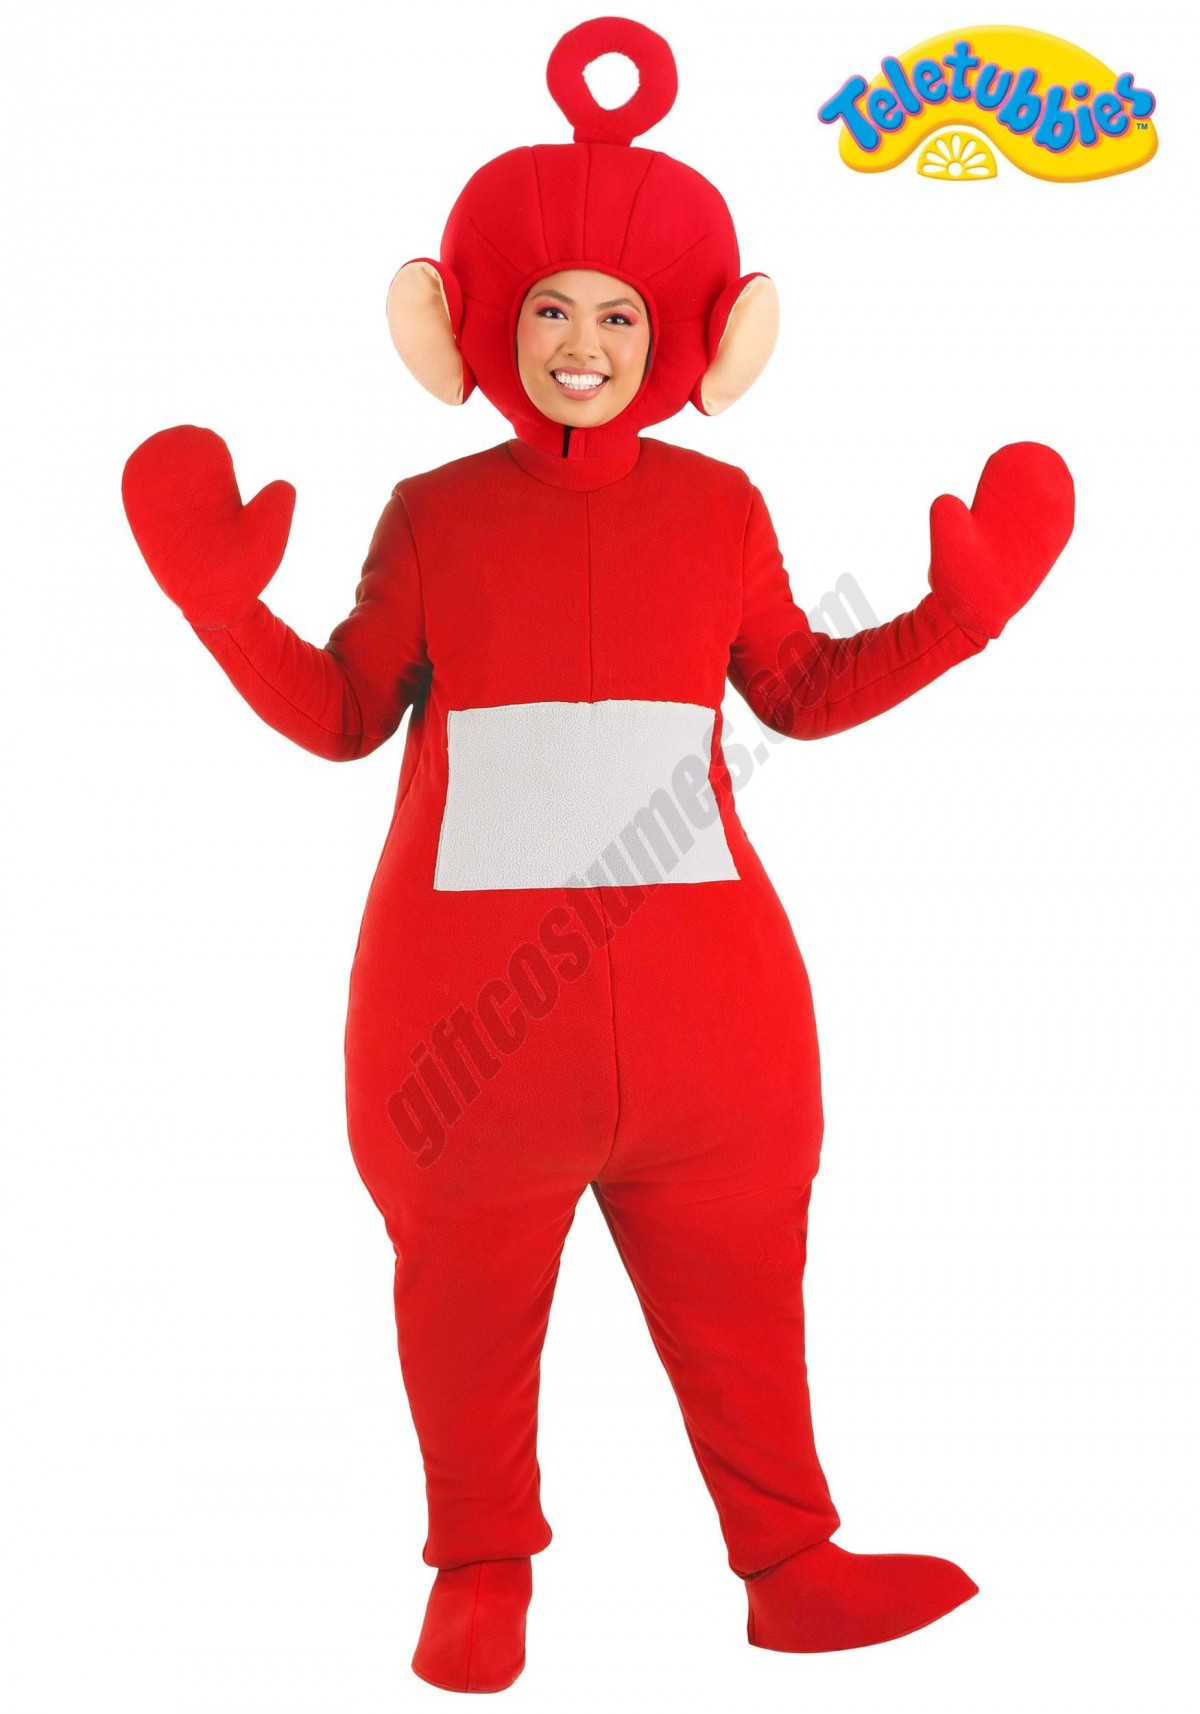 Plus Size Po Teletubbies Costume for Adults Promotions - -0